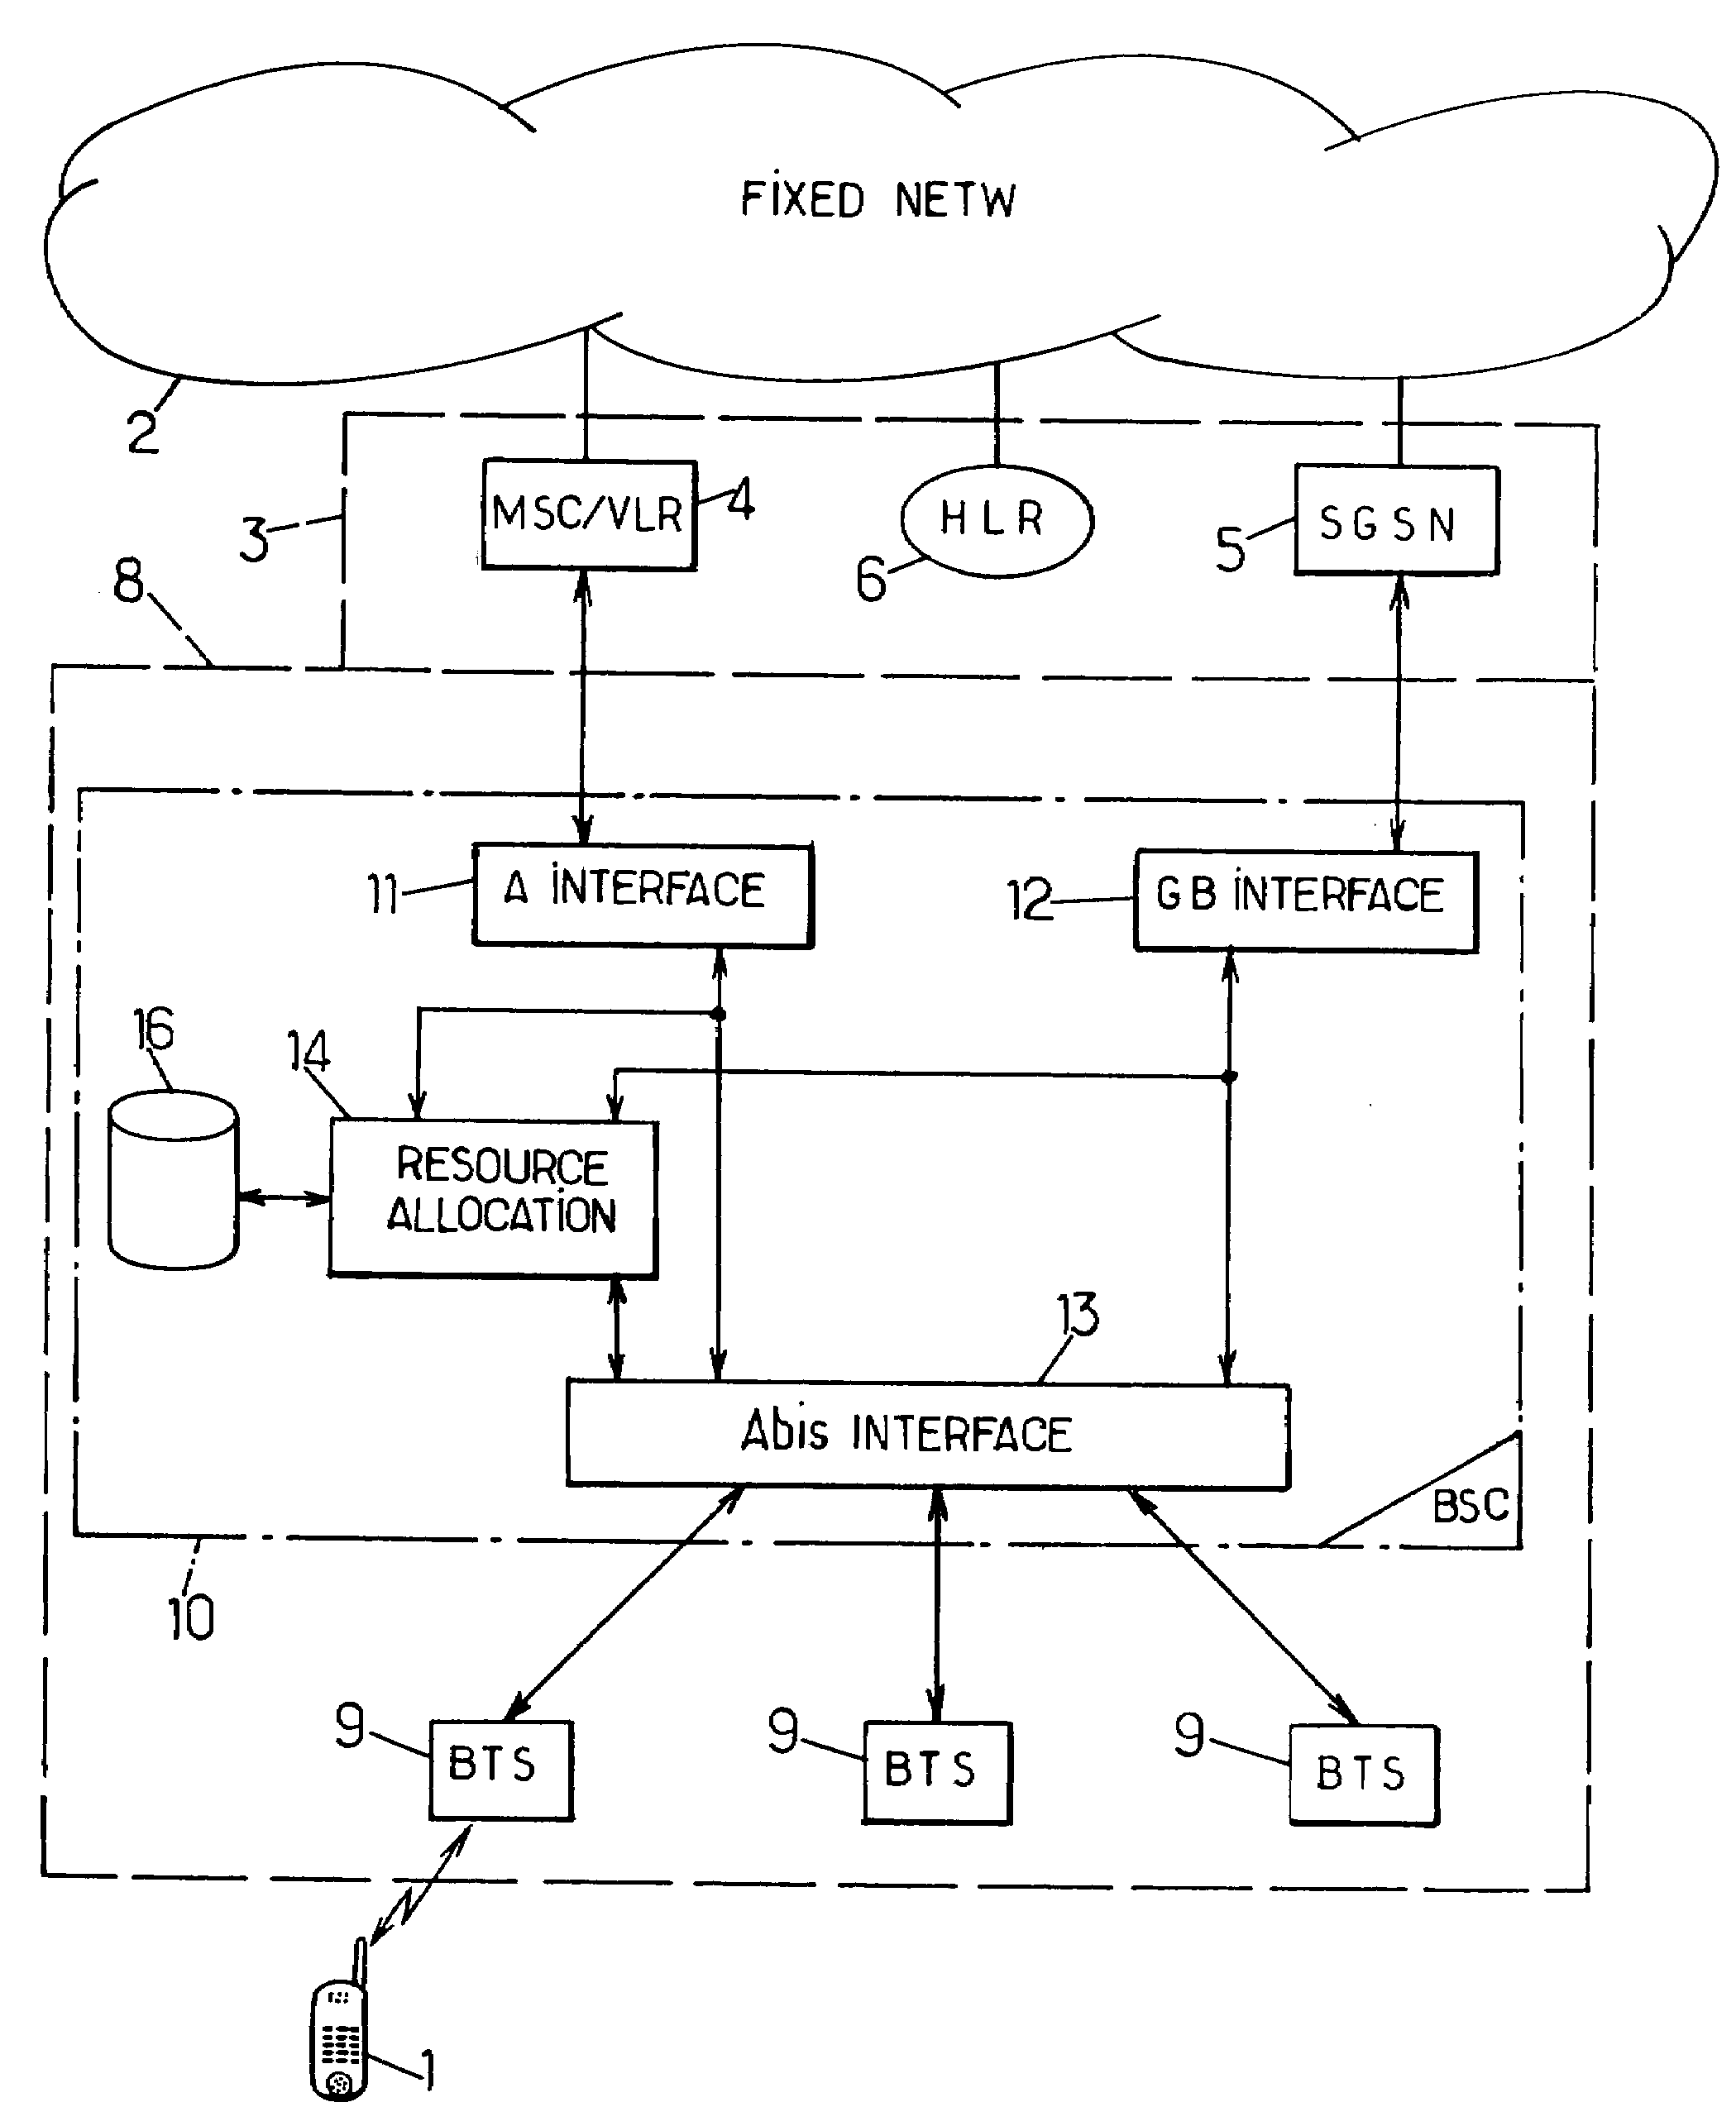 Method and system for supplying services to mobile stations in active mode